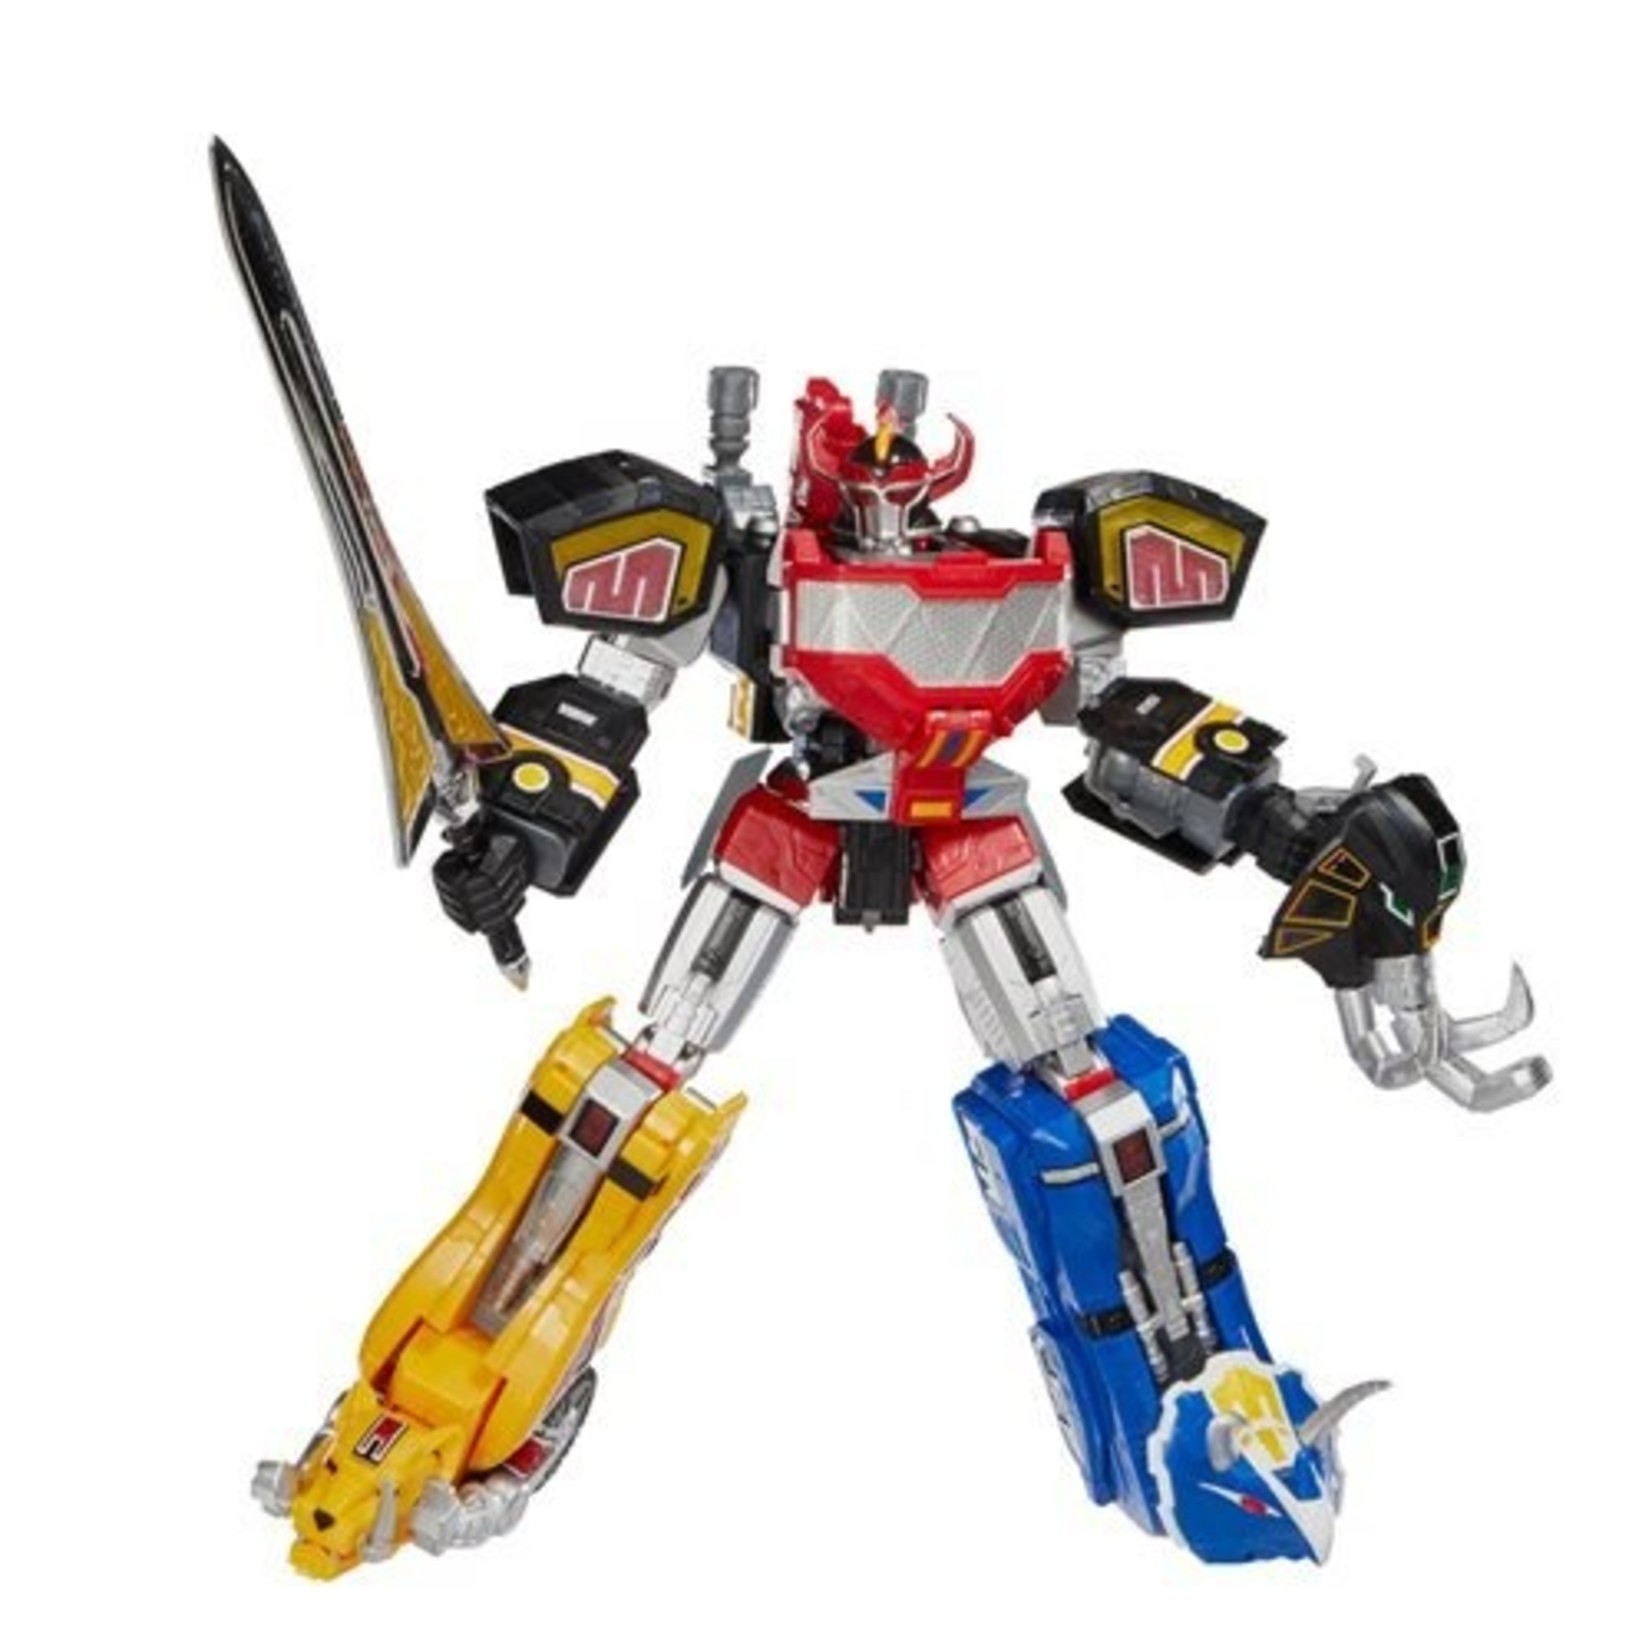 Power Rangers Hasbro Power Rangers Lightning Collection Zord Ascension Project Mighty Morphin Dino Megazord